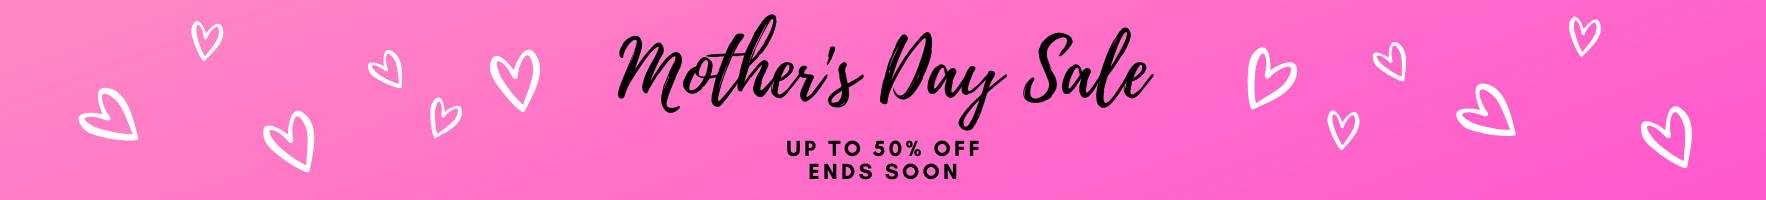 Mother's Day Sale 50% off